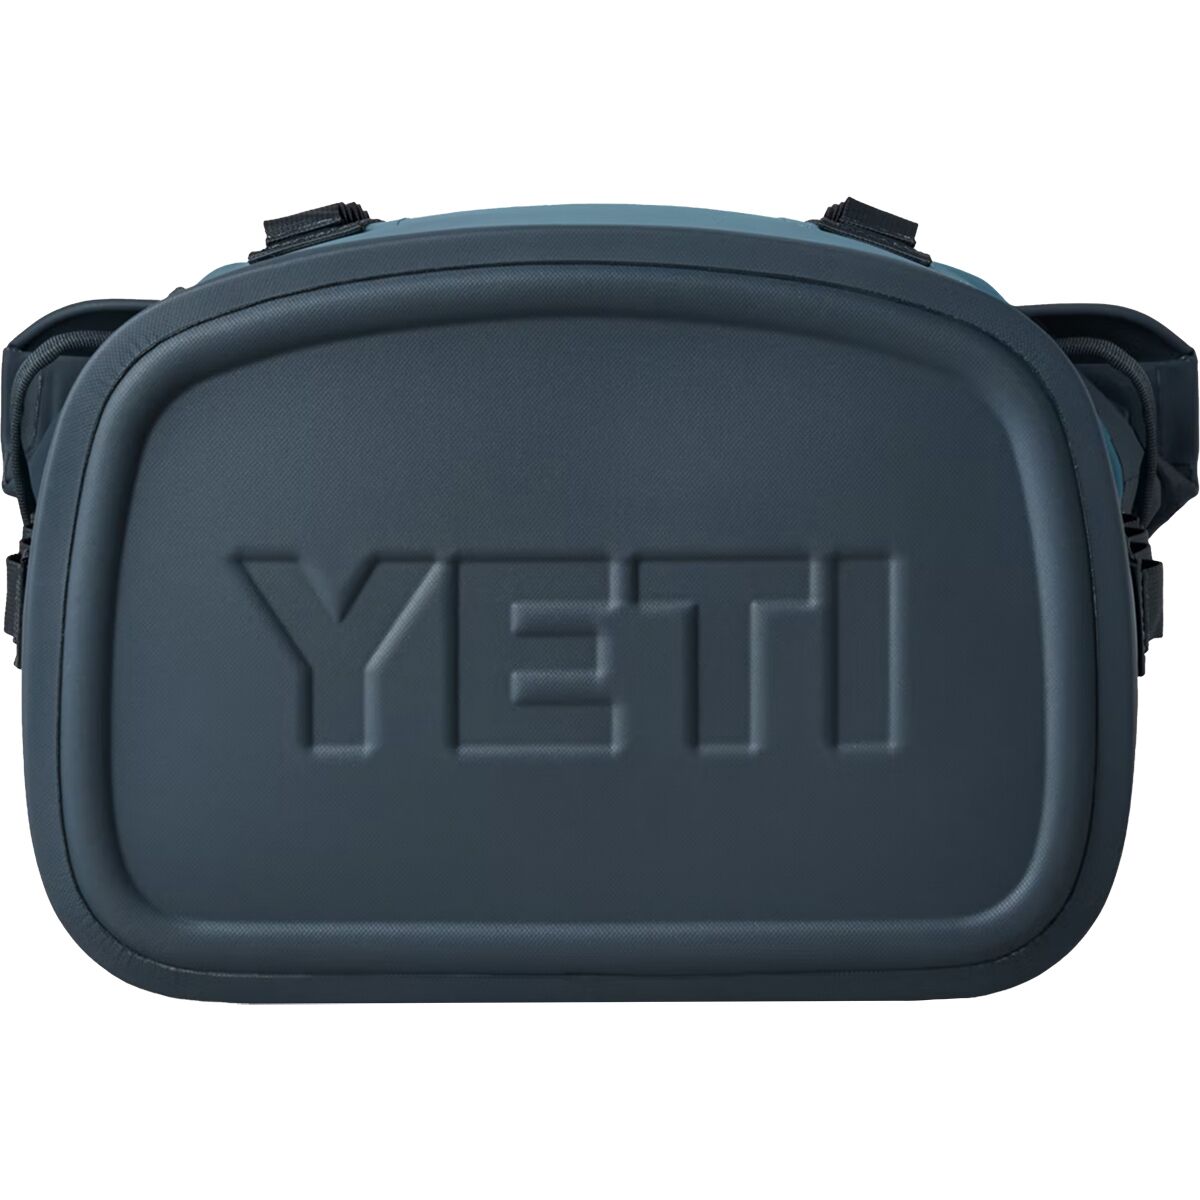 Yeti M20 Hopper Cooler Bag - Haul your drinks & food further with this  beauty! 